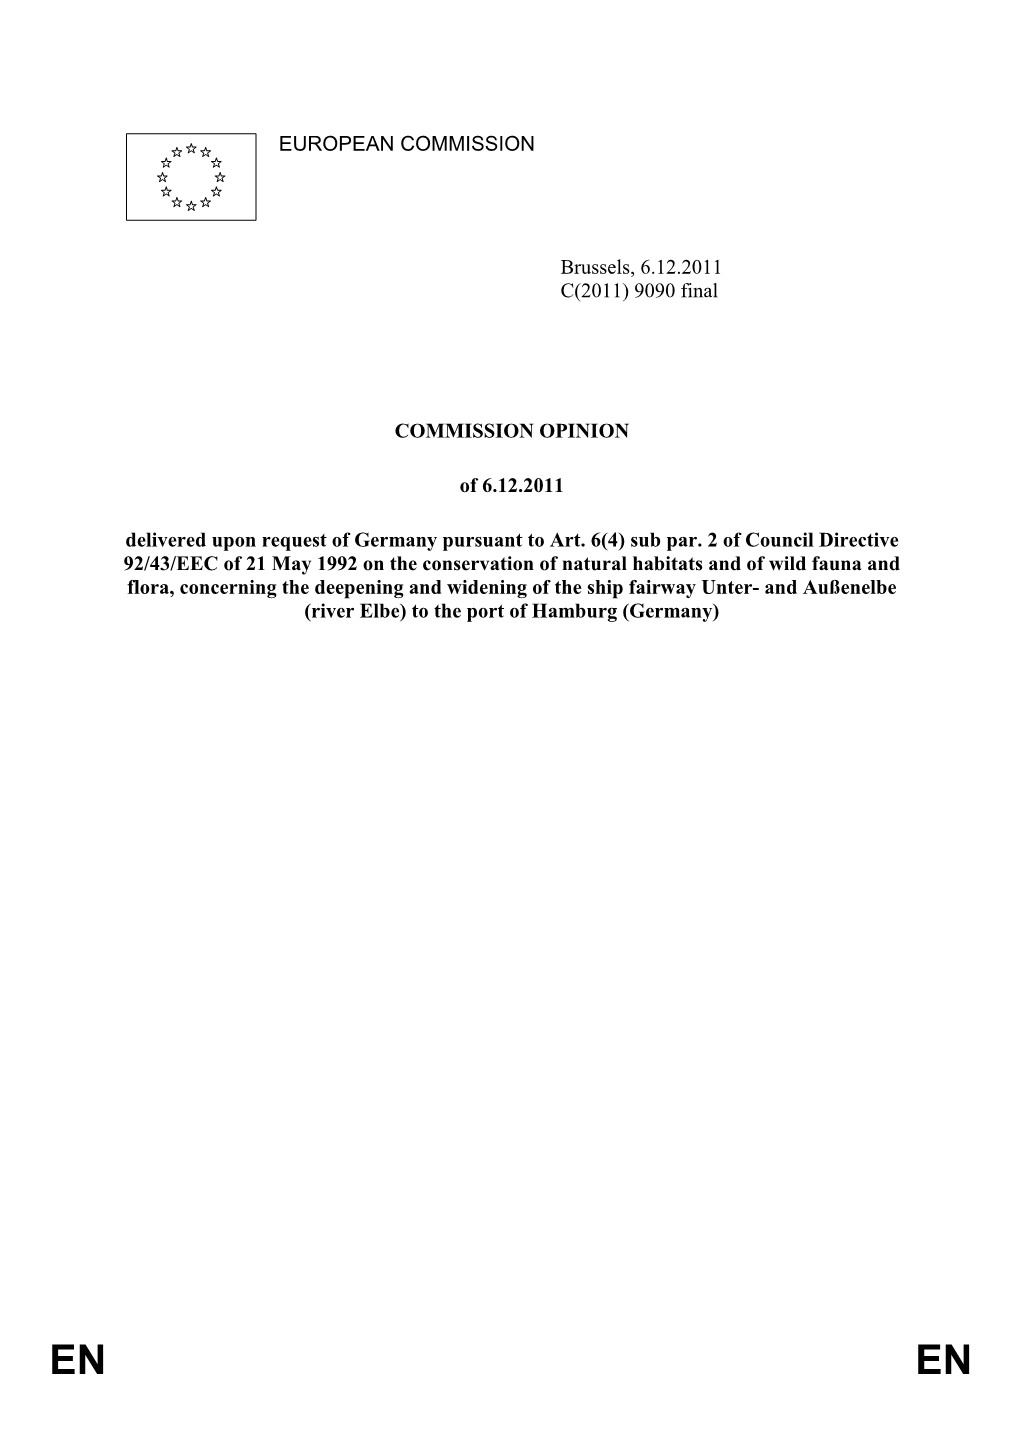 9090 Final COMMISSION OPINION of 6.12.2011 Delivered Upon Request